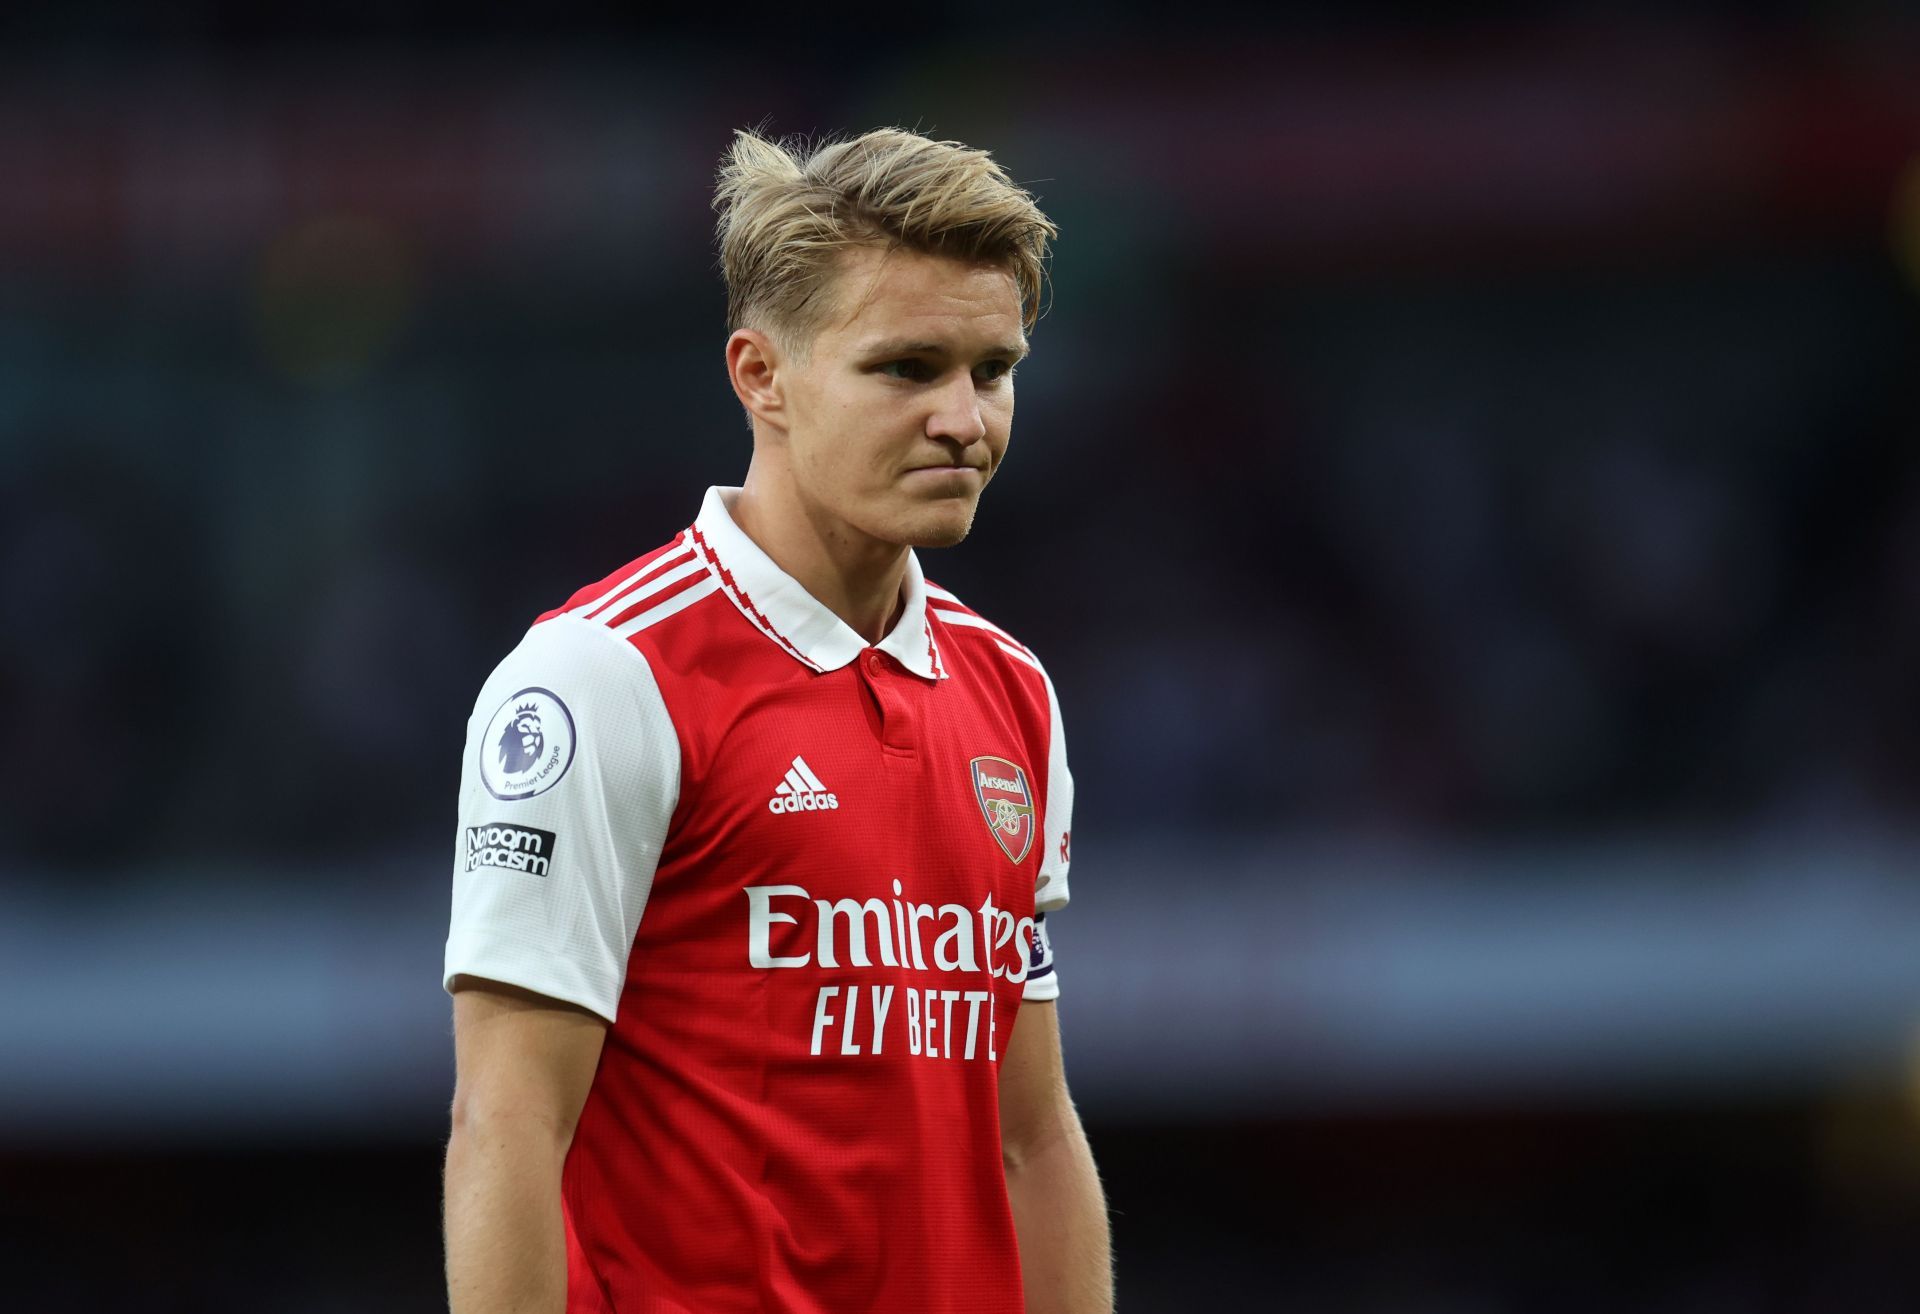 Martin Odegaard has enjoyed a brilliant run since taking over the armband at the Emirates.